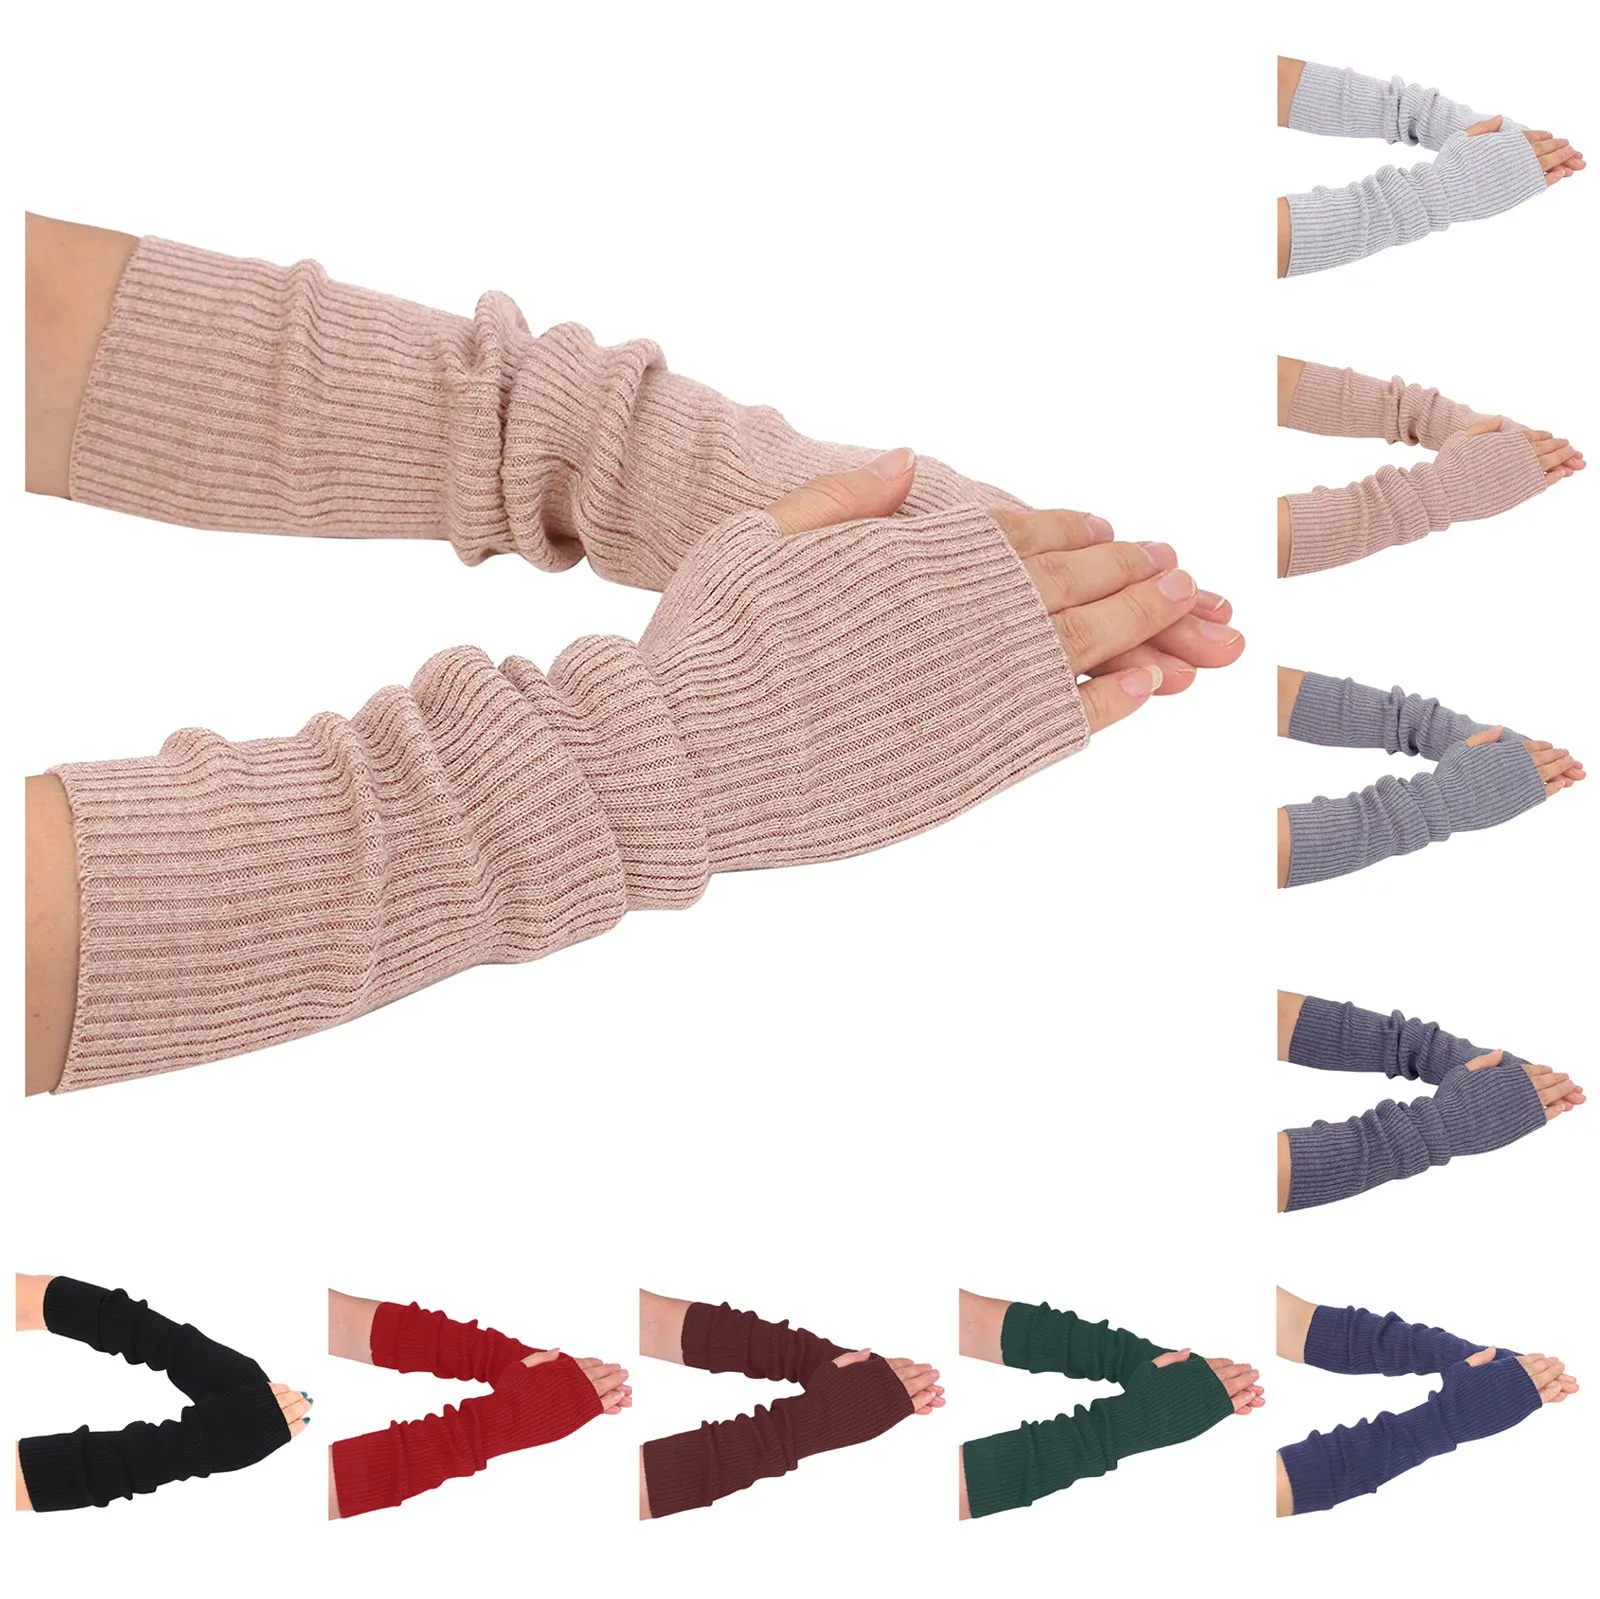 

Cashmere Gloves Long Fingerless Gloves Women Arm Warmers Goth Knitted Wool Mittens Winter White Punk Elbow Sleeve Knited Gloves